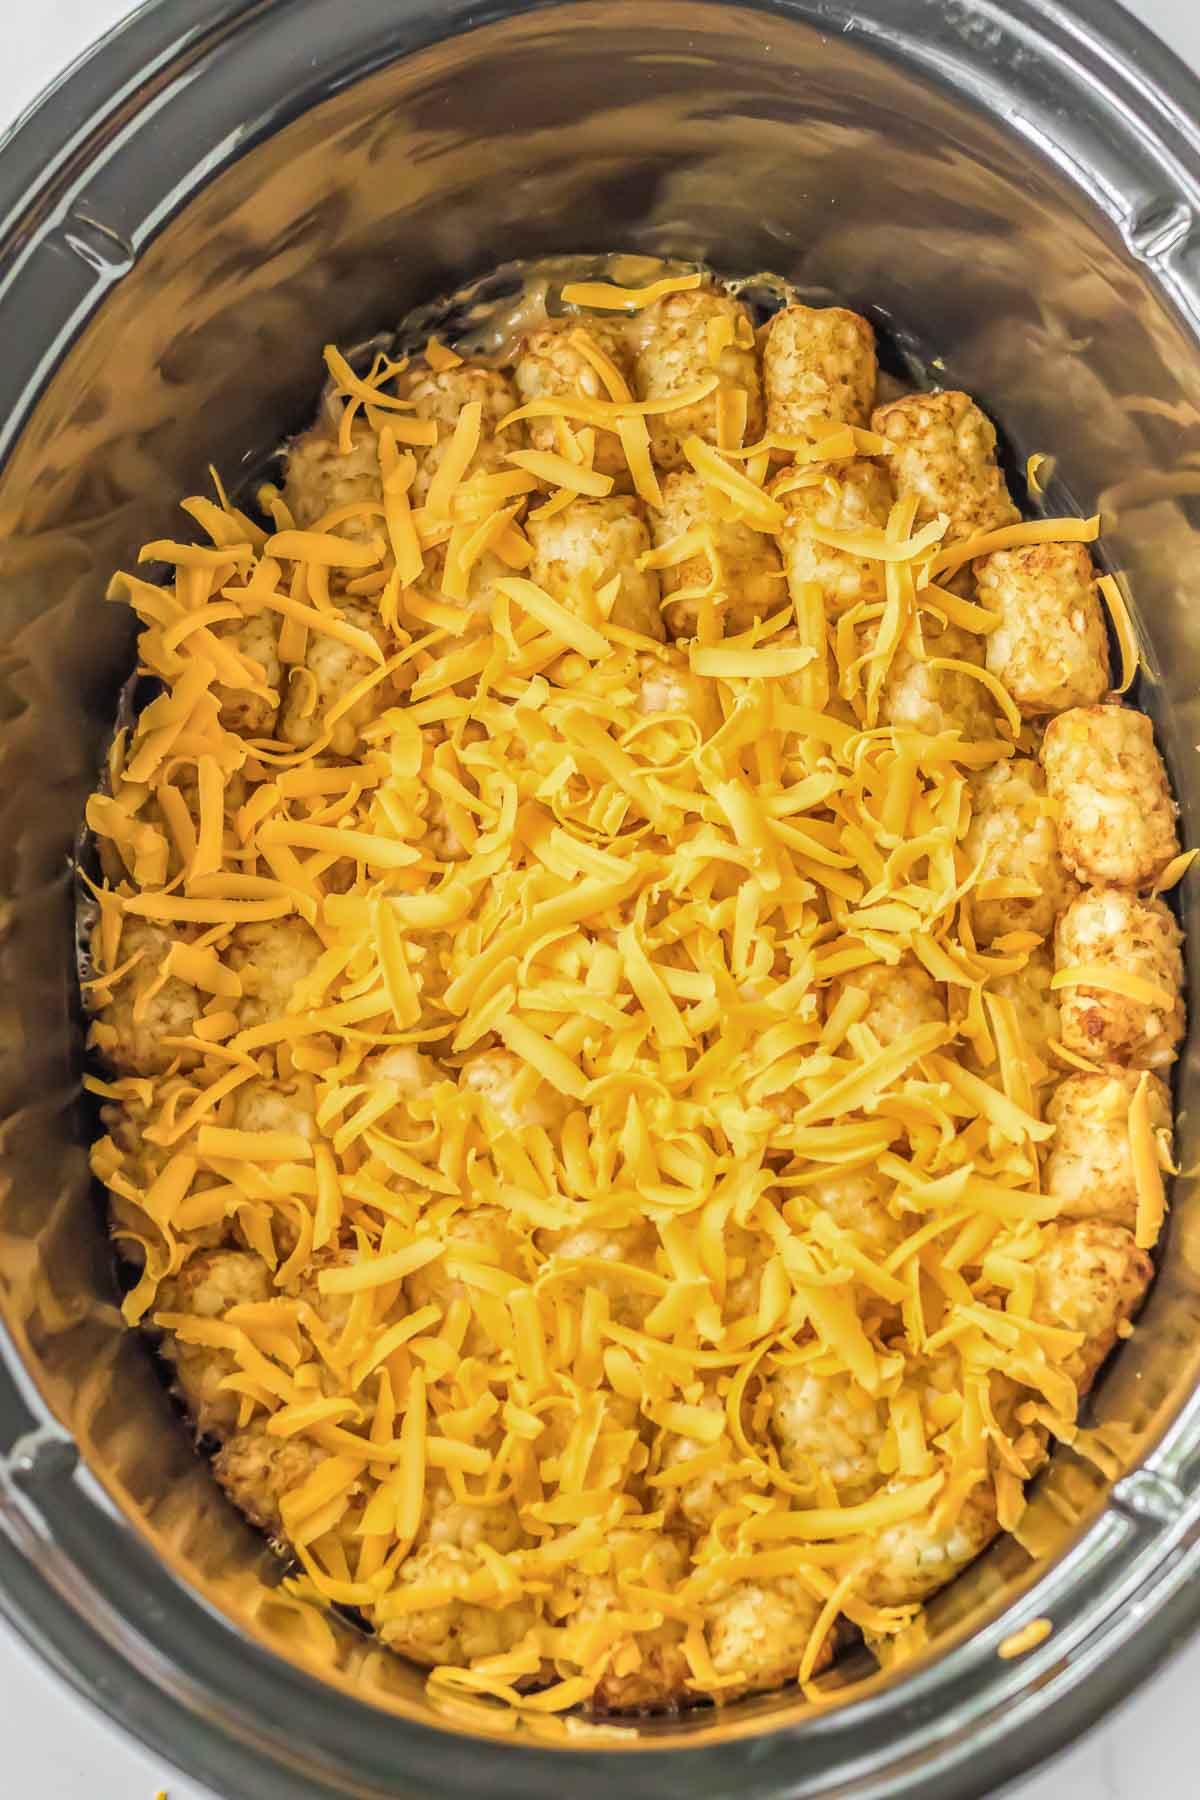 A crock pot full of tater tots topped with shredded cheese.